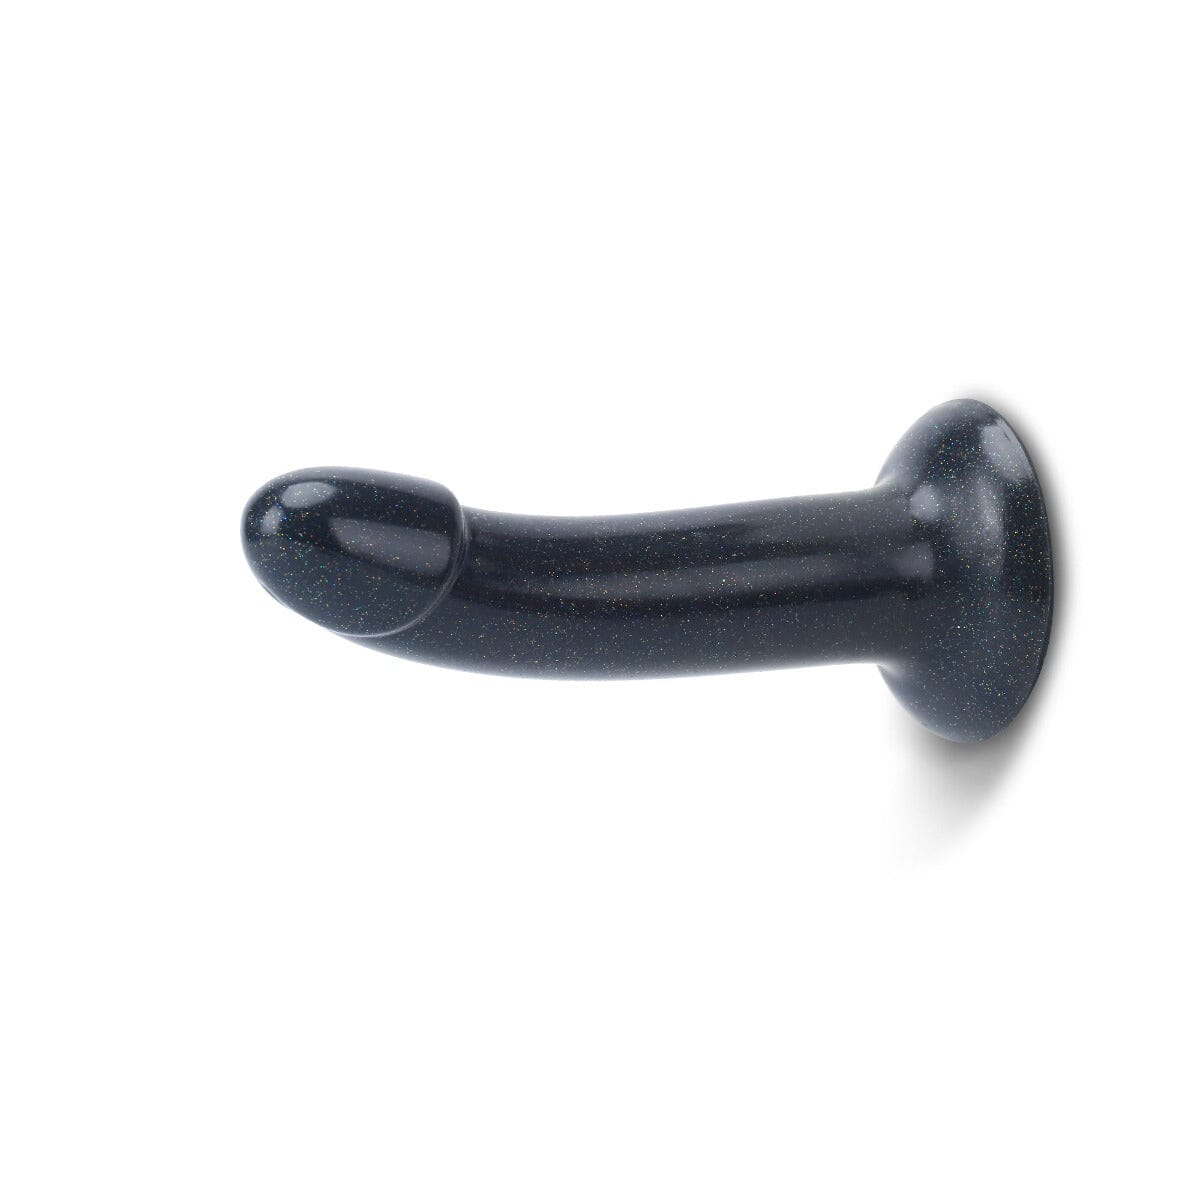 a close up of a black object on a white background